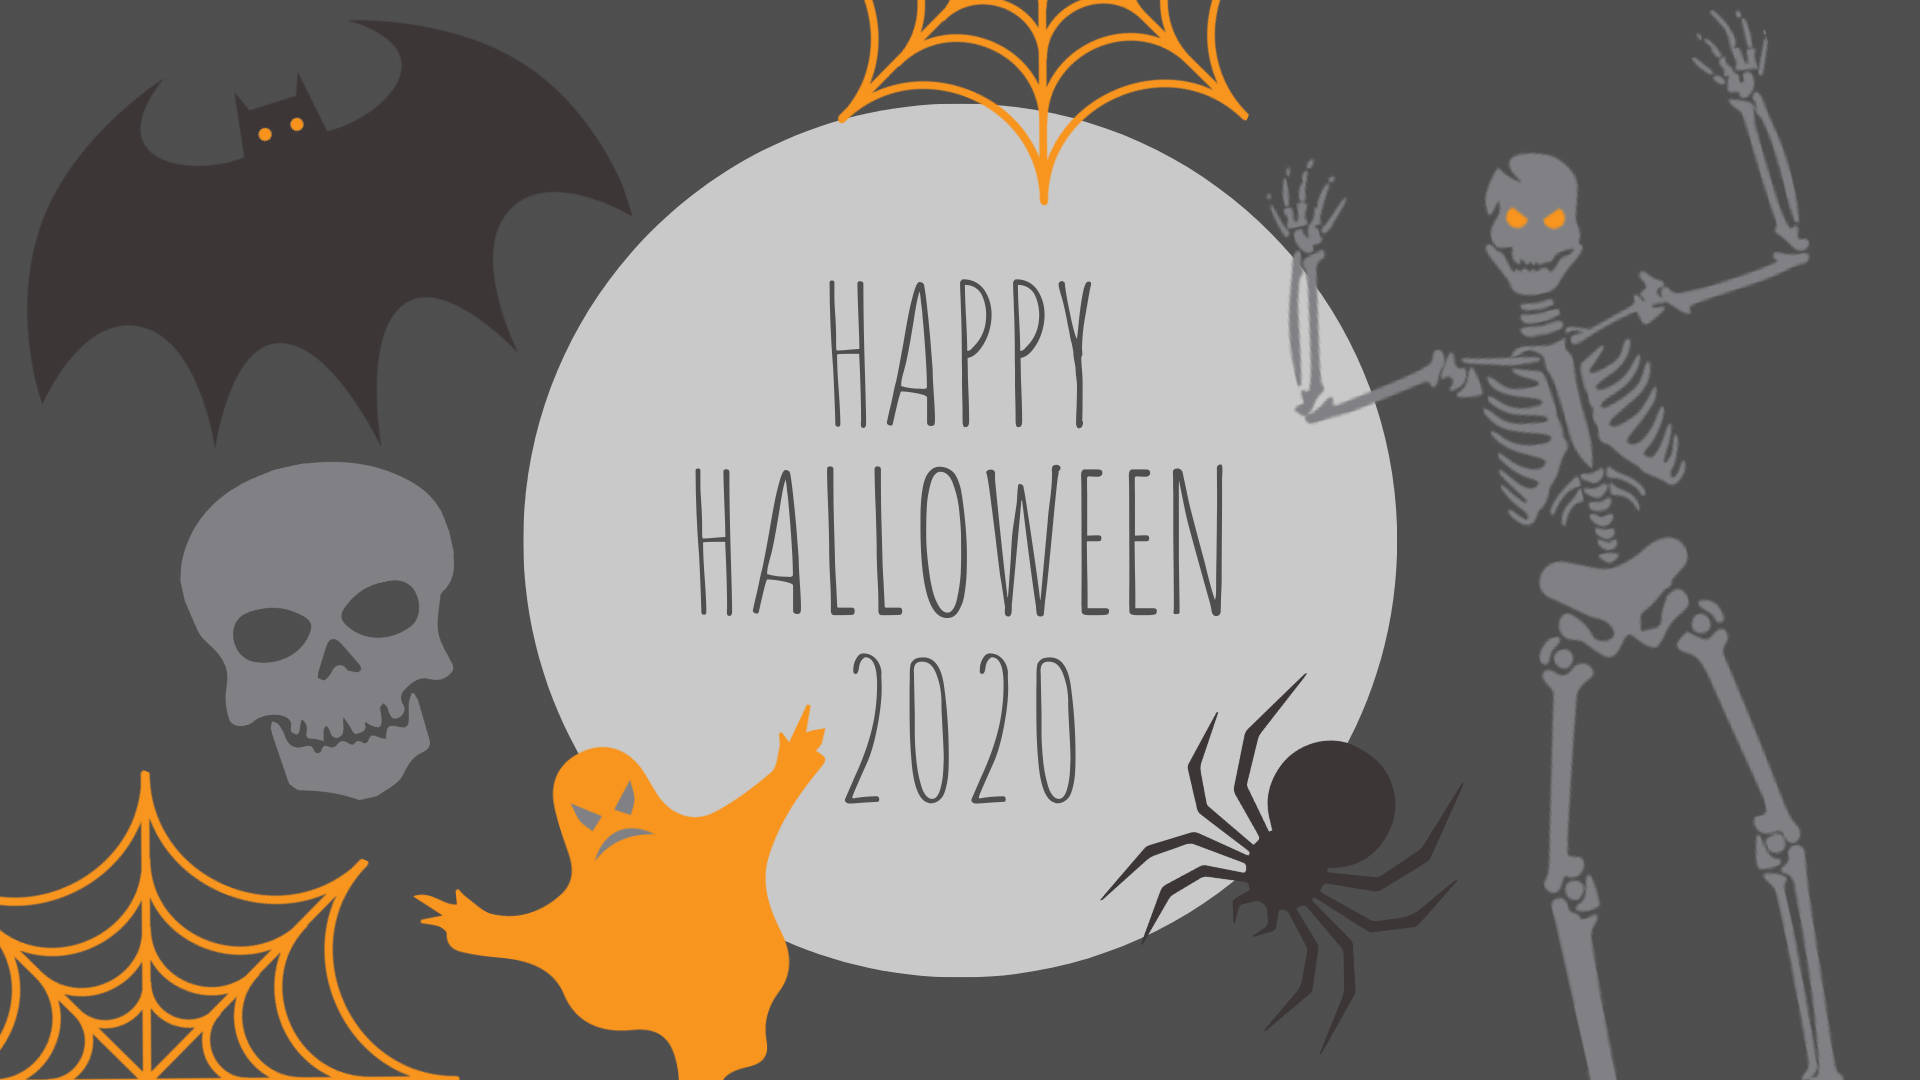 Celebrate Happy Halloween With This Spooky Image! Background